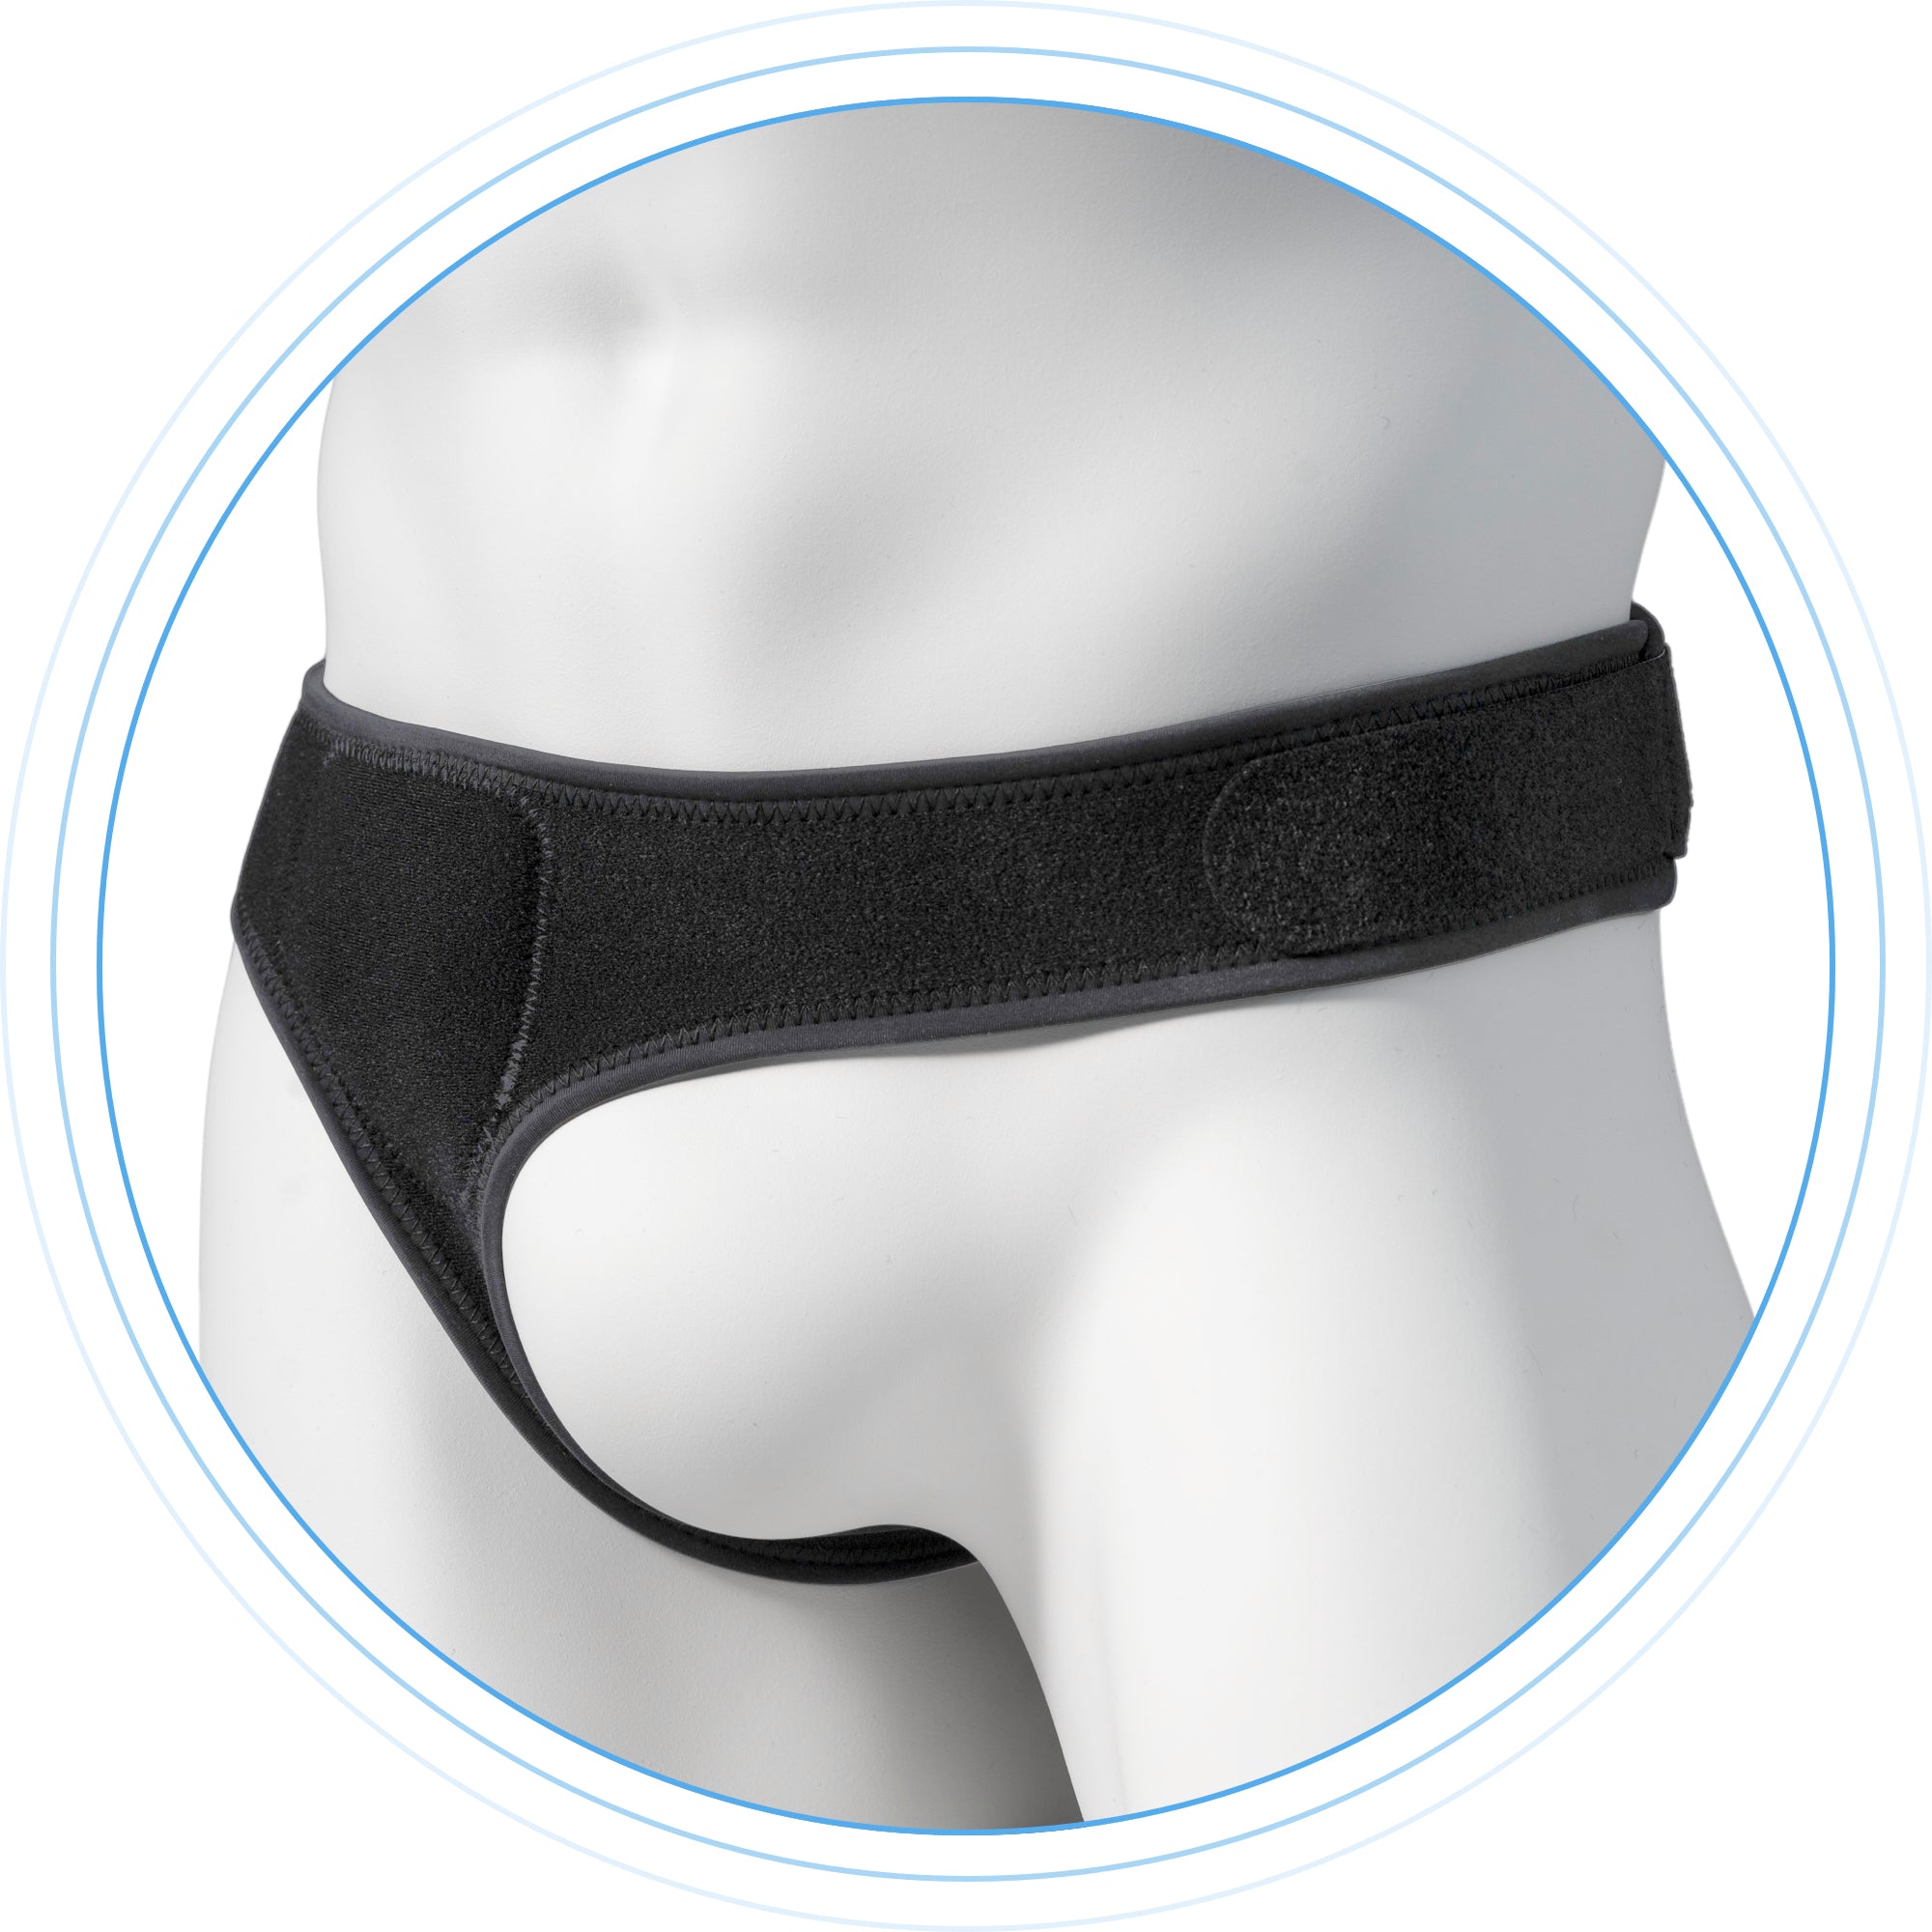 Mannequin wearing right side minimalist hernia belt front view